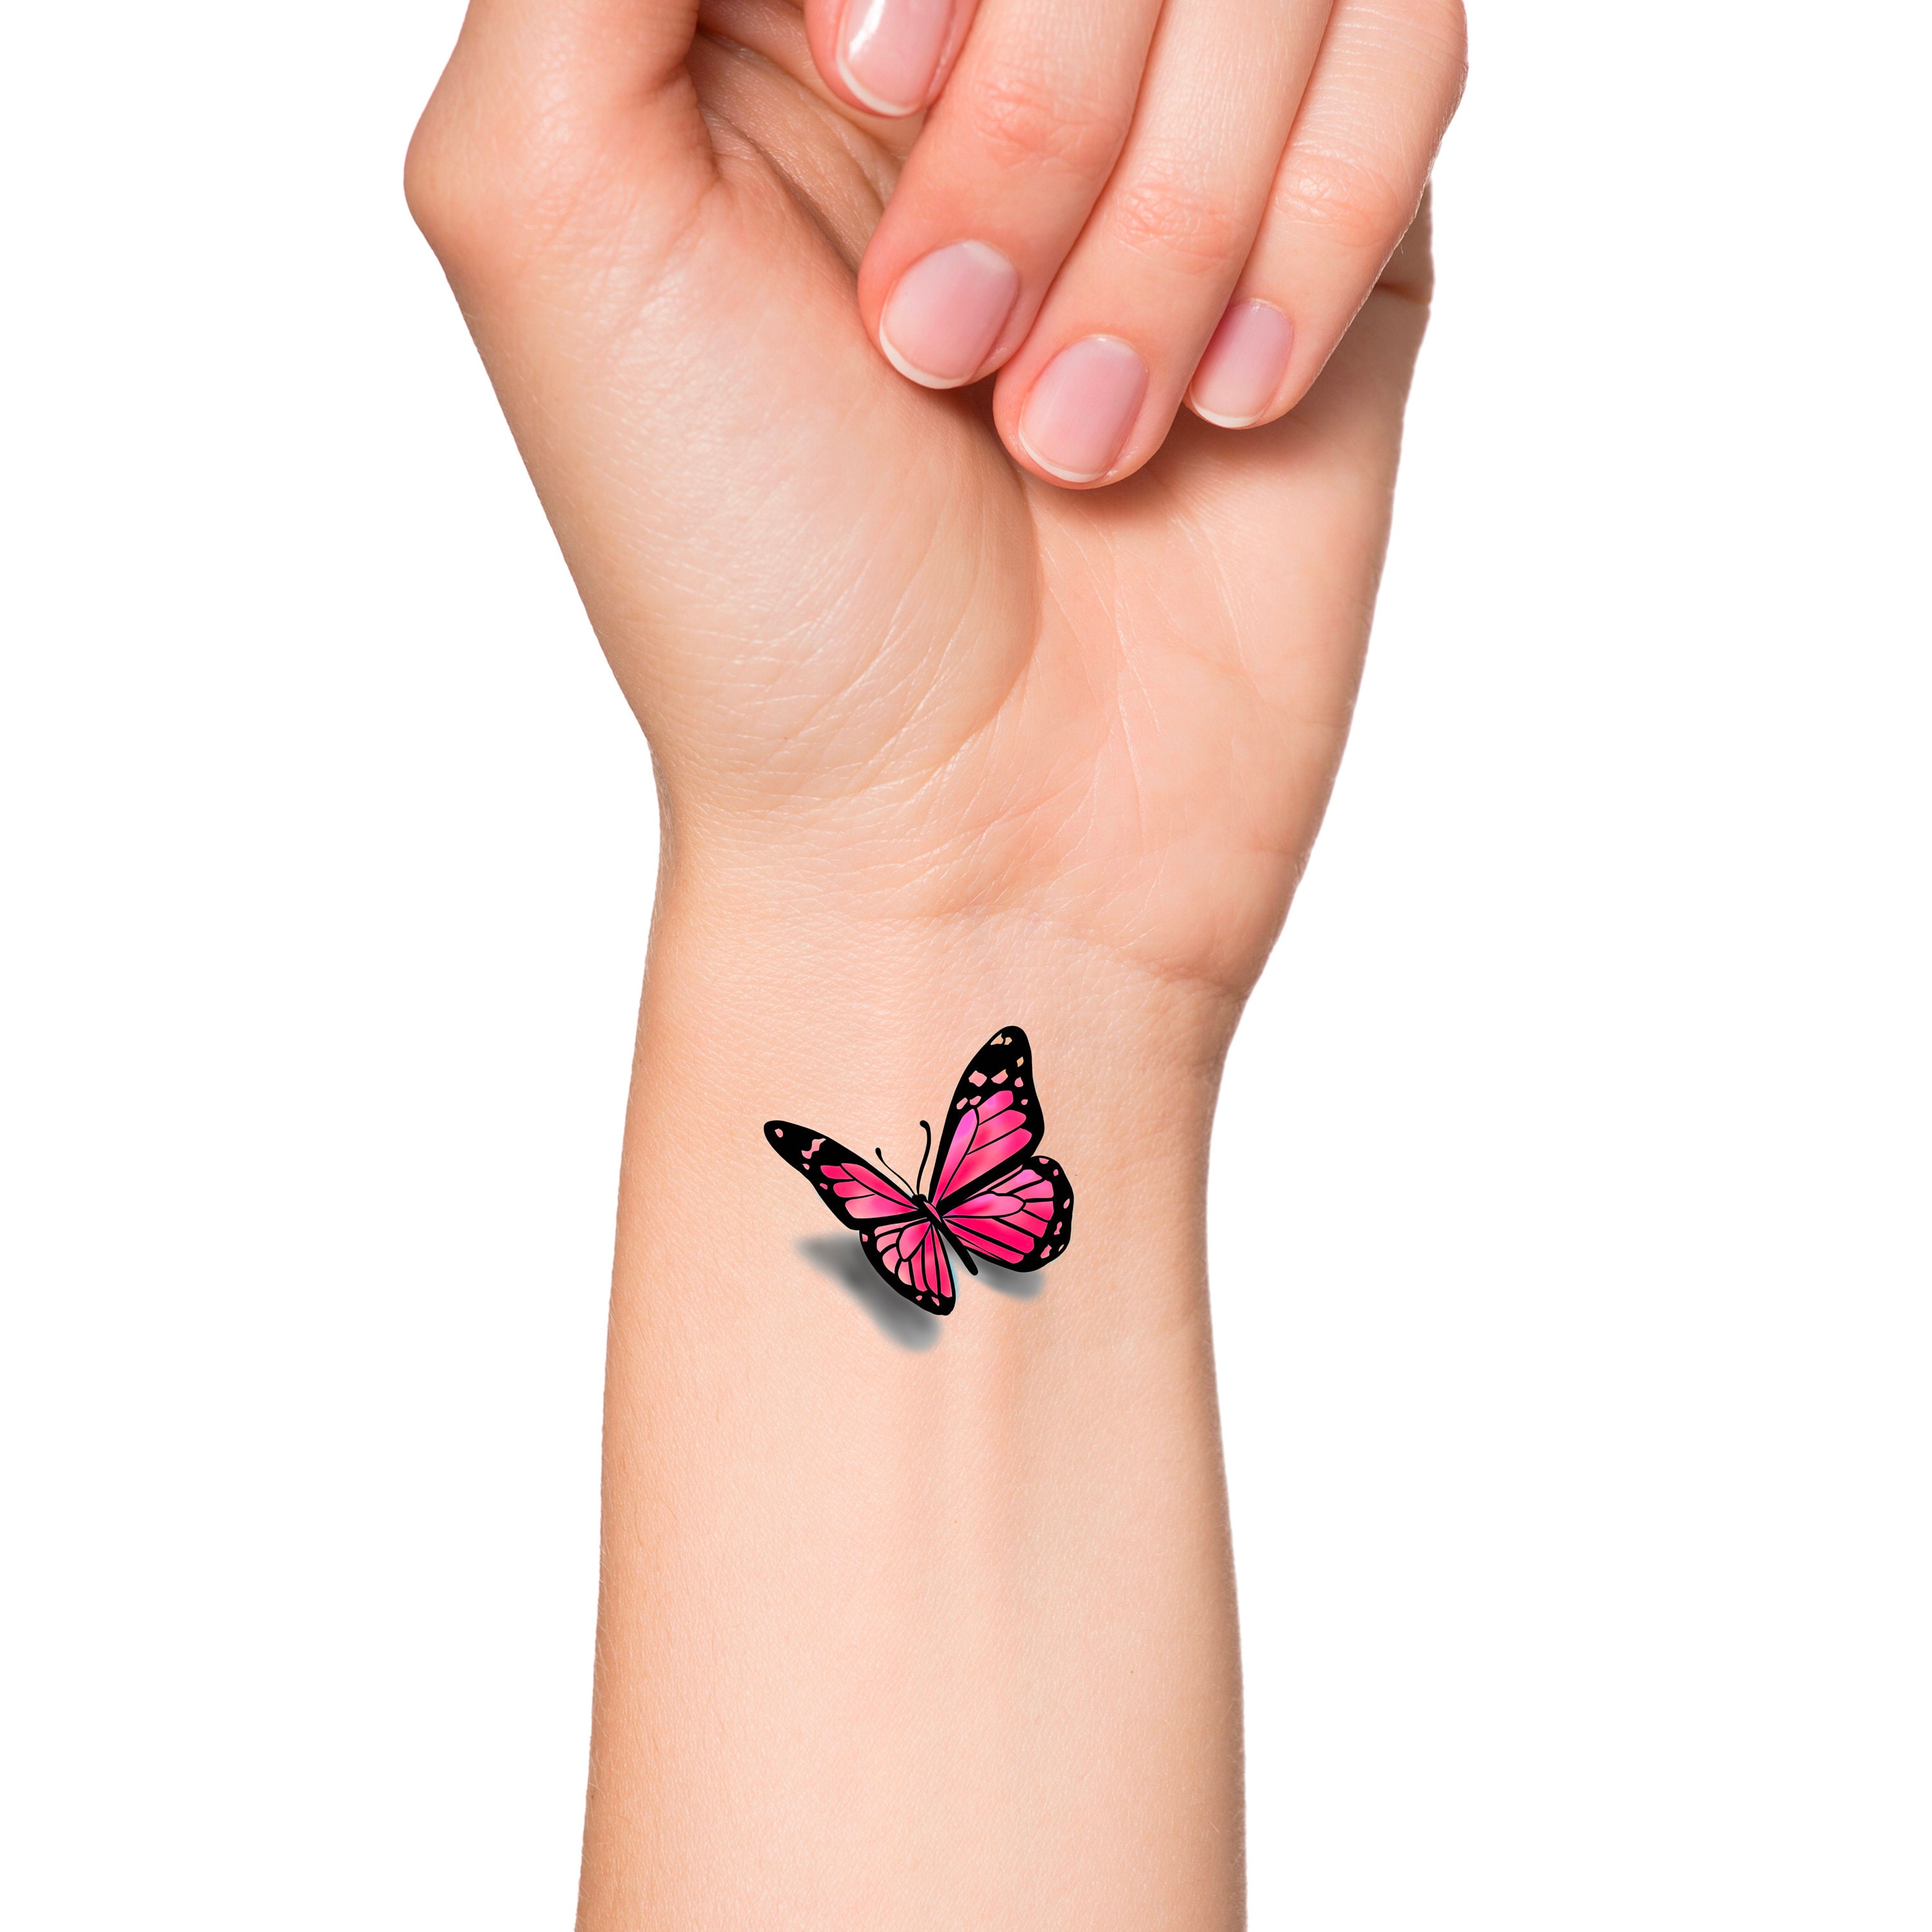 3D Tattoos in Bhosari Gaon,Pune - Best Temporary Tattoo Artists in Pune -  Justdial